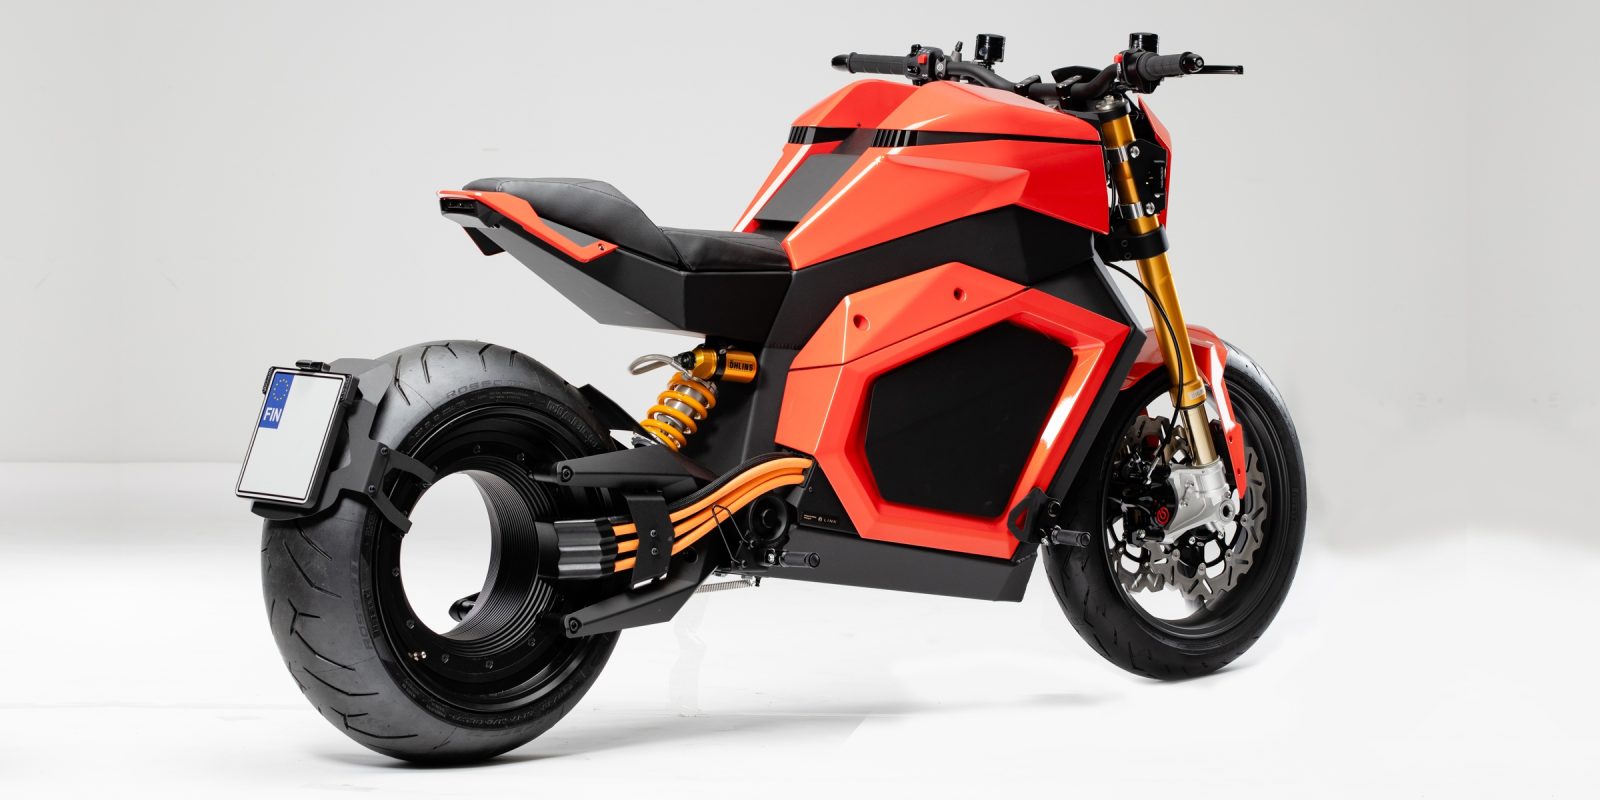 verge ts electric motorcycle